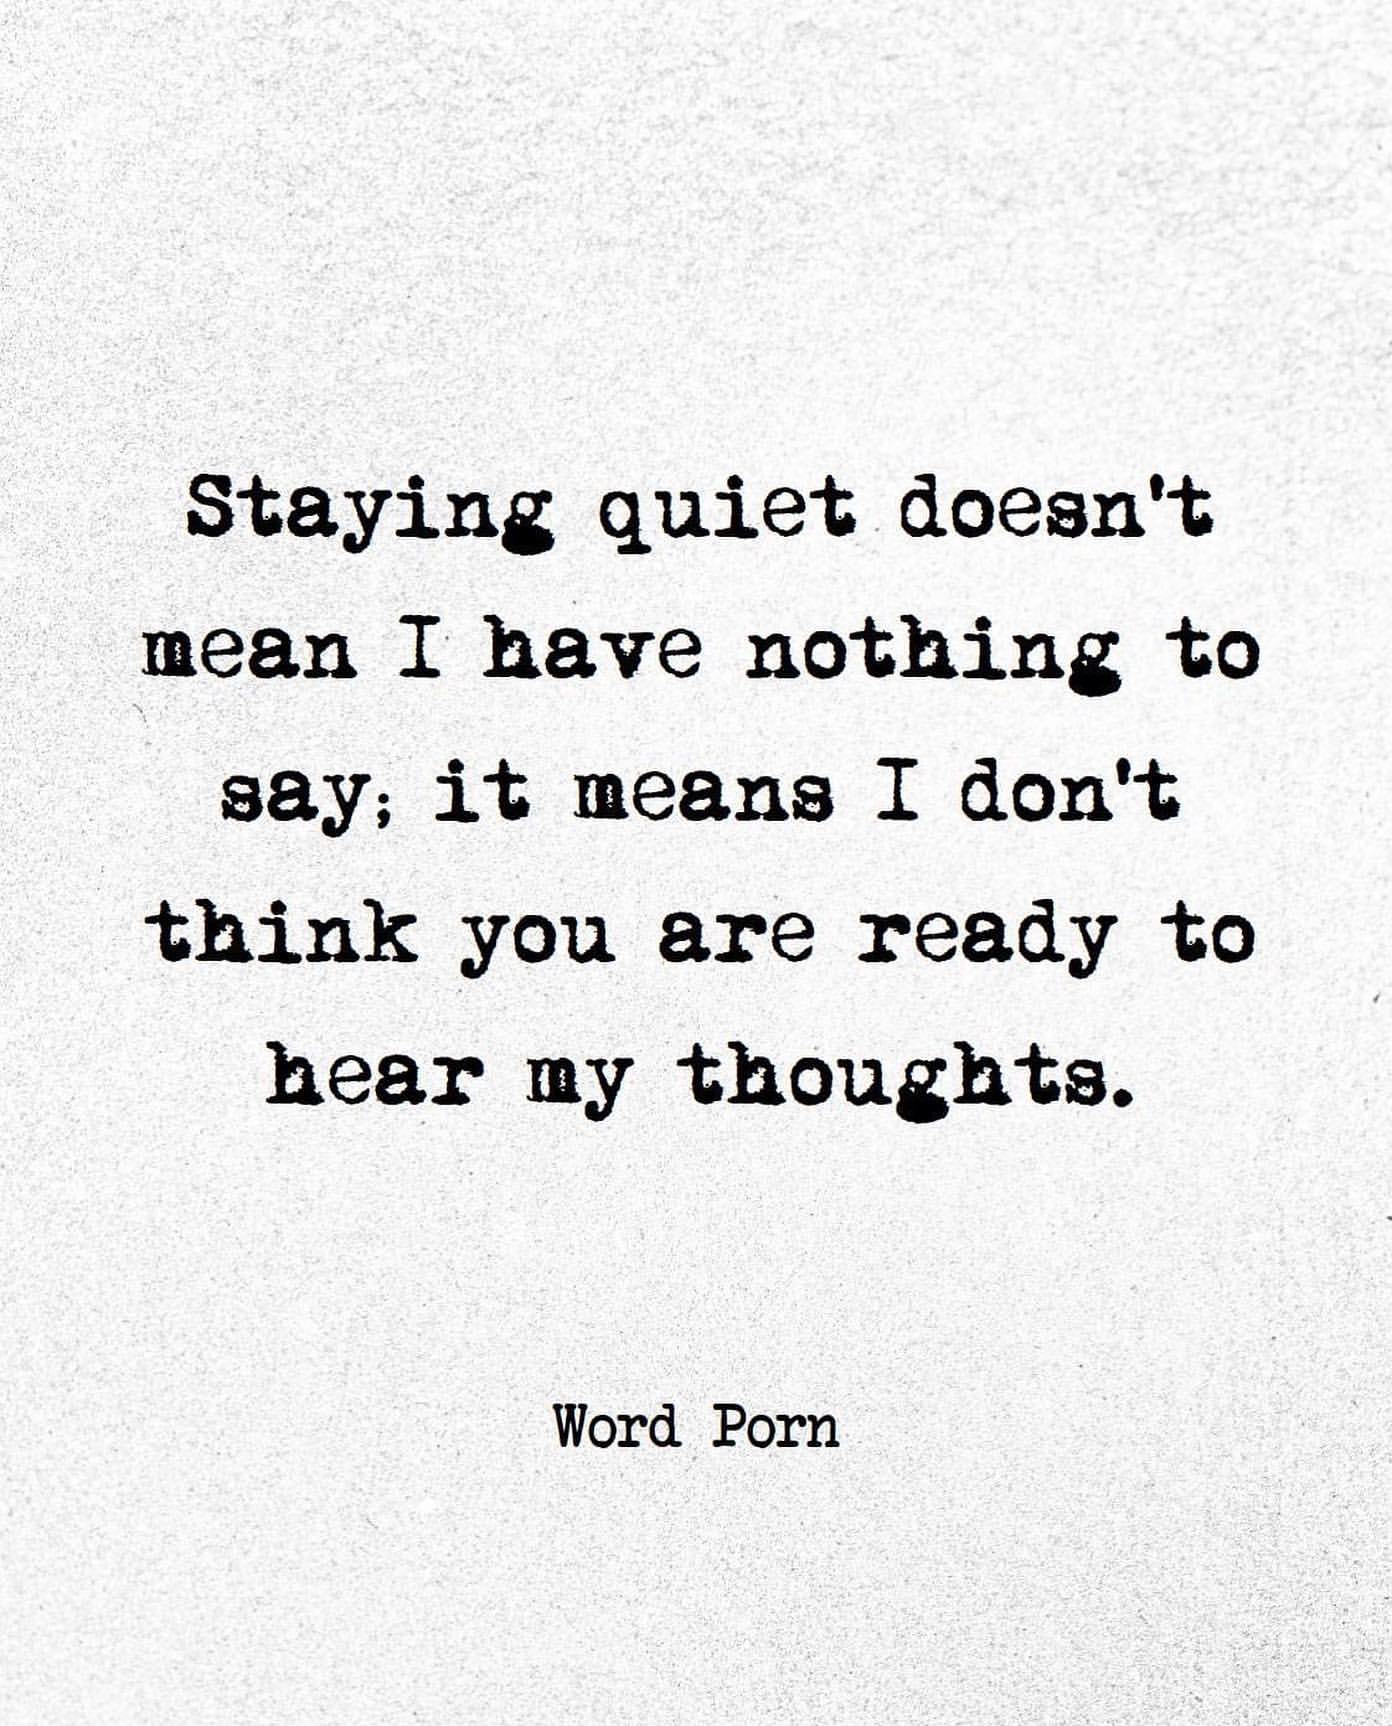 Staying quiet doesn't mean I have nothing to say; it means I don't think you are ready to hear my thoughts.